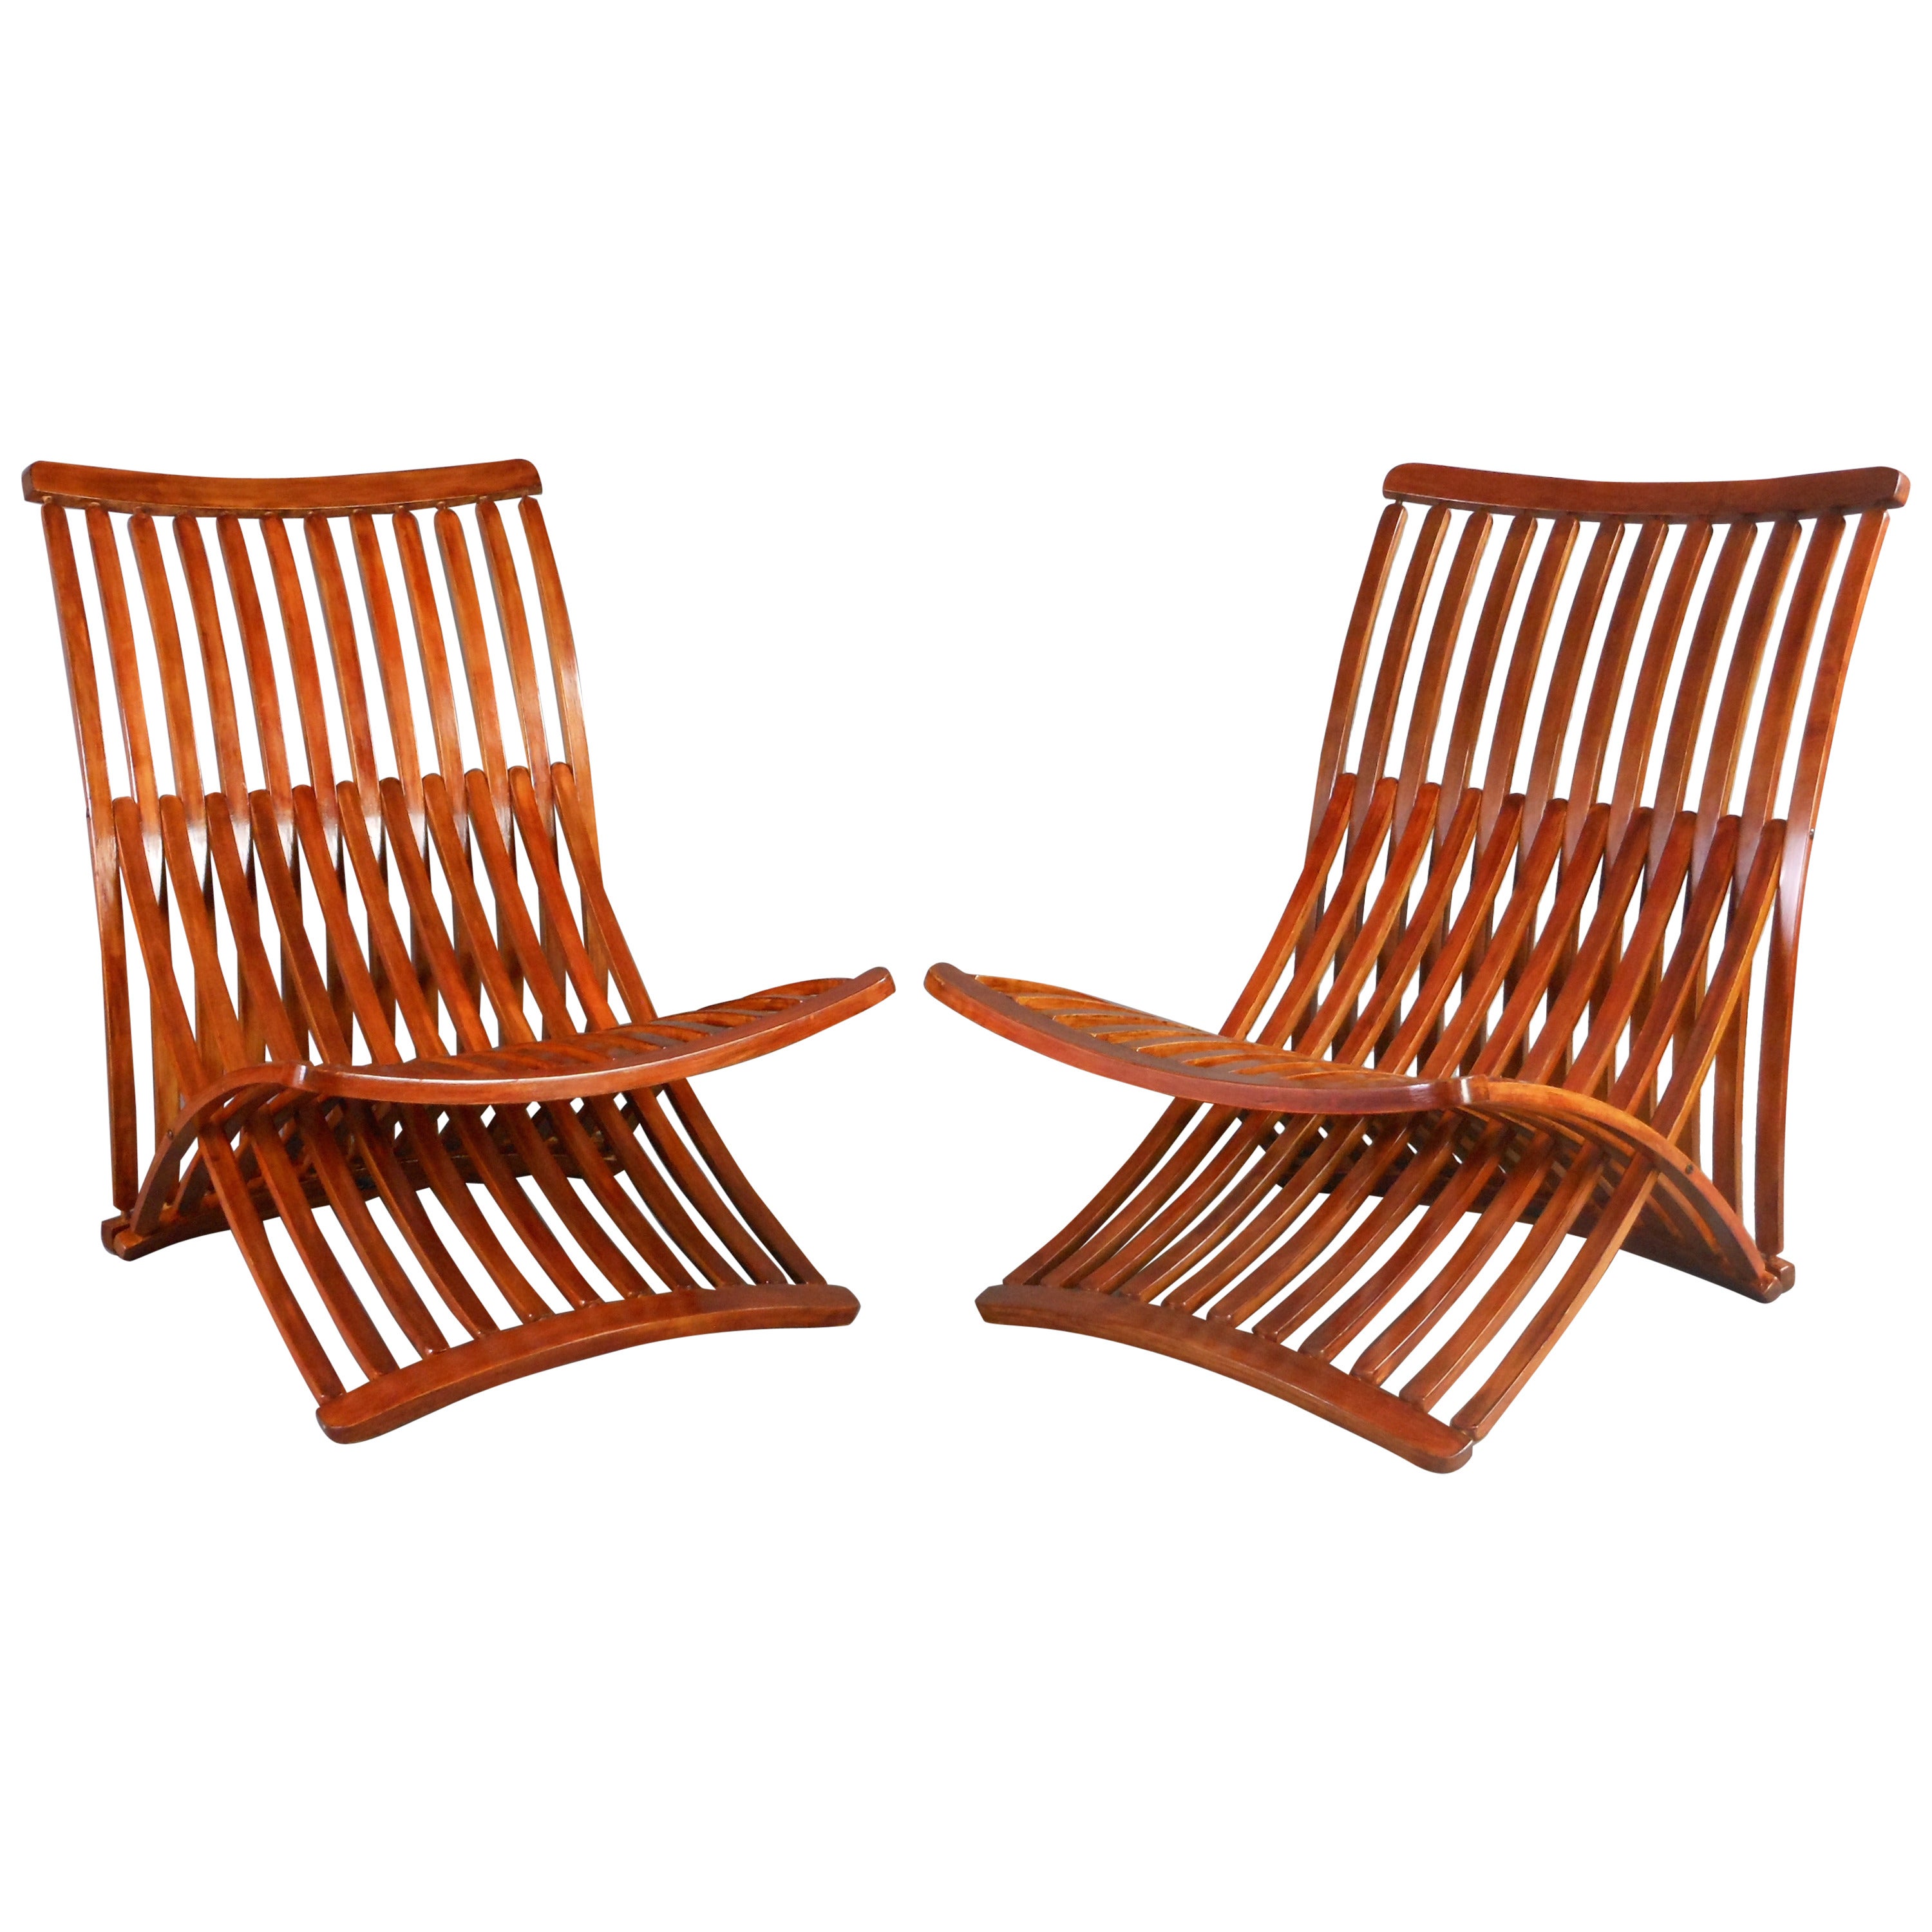 Canadian Birch Steamer Chairs by Thomas Lamb, circa 1970 For Sale